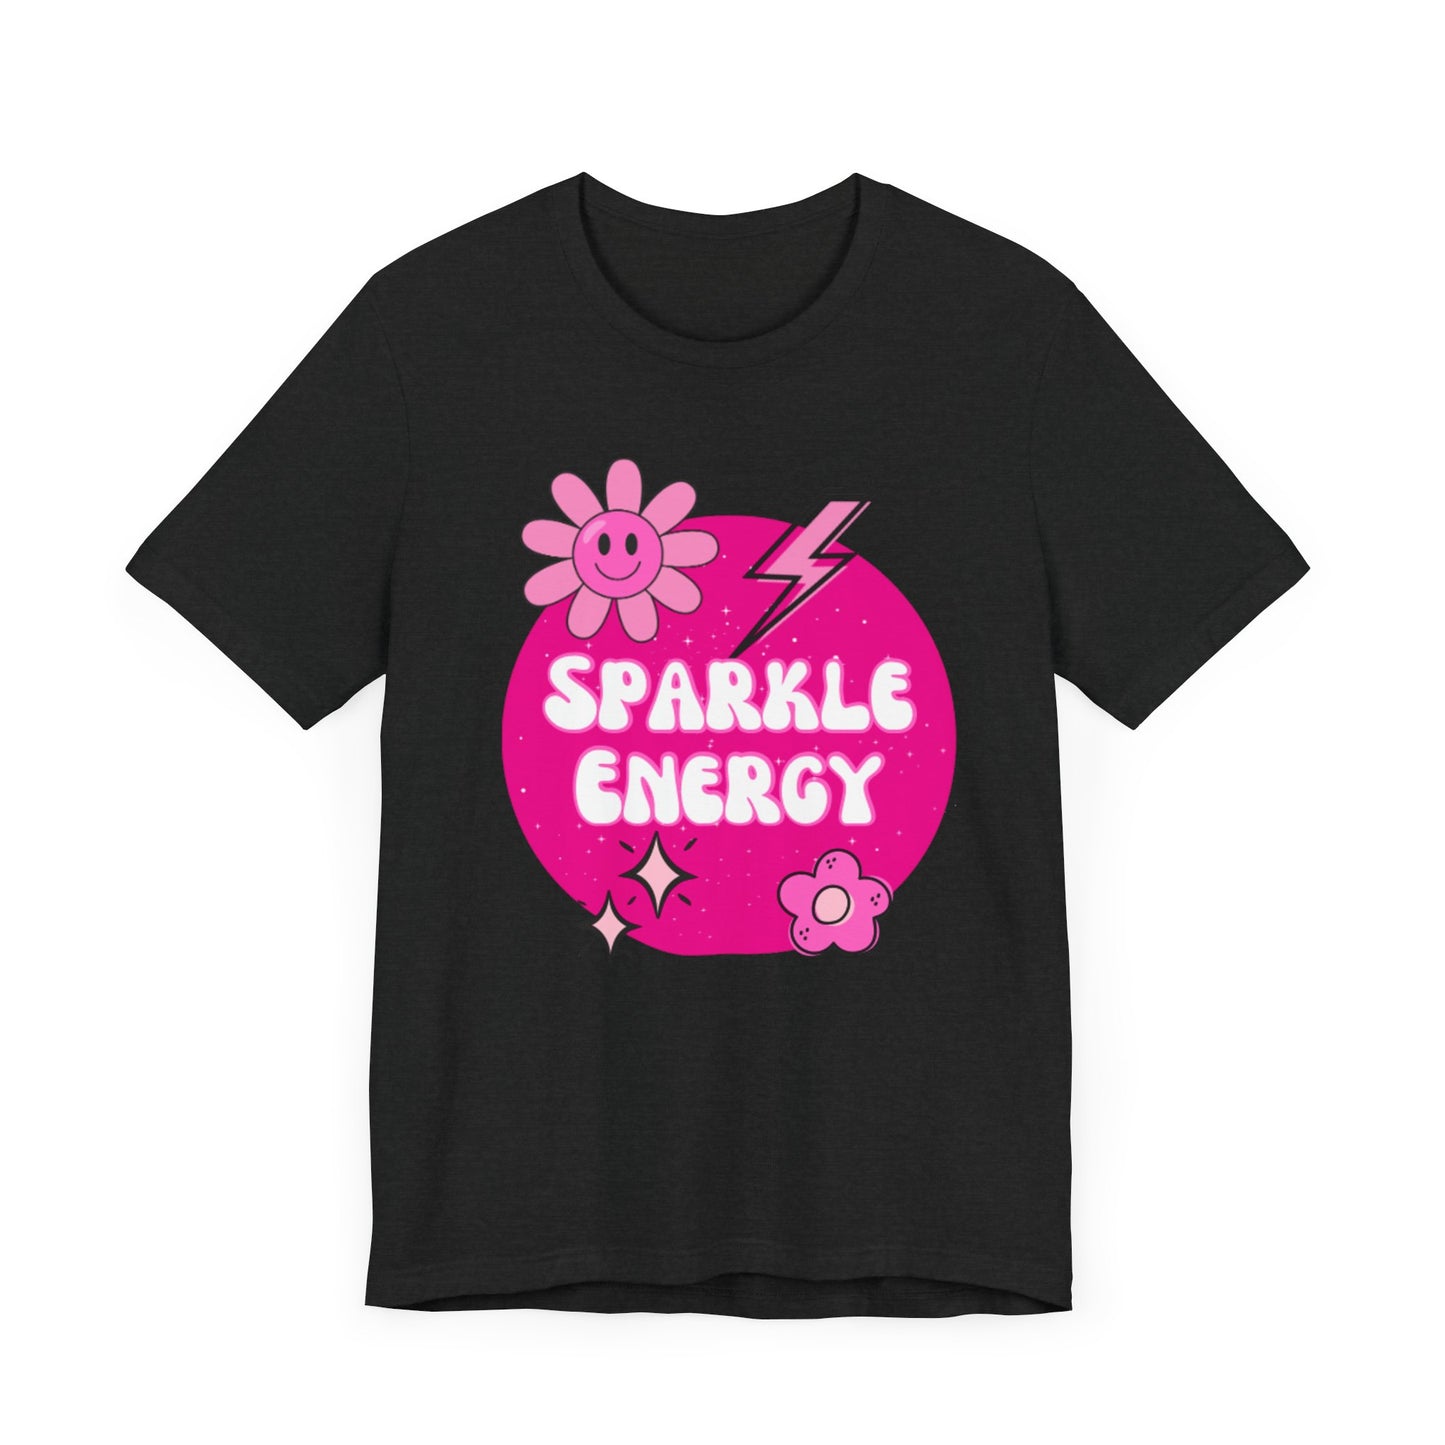 Sparkle Energy by The Artsy Girl